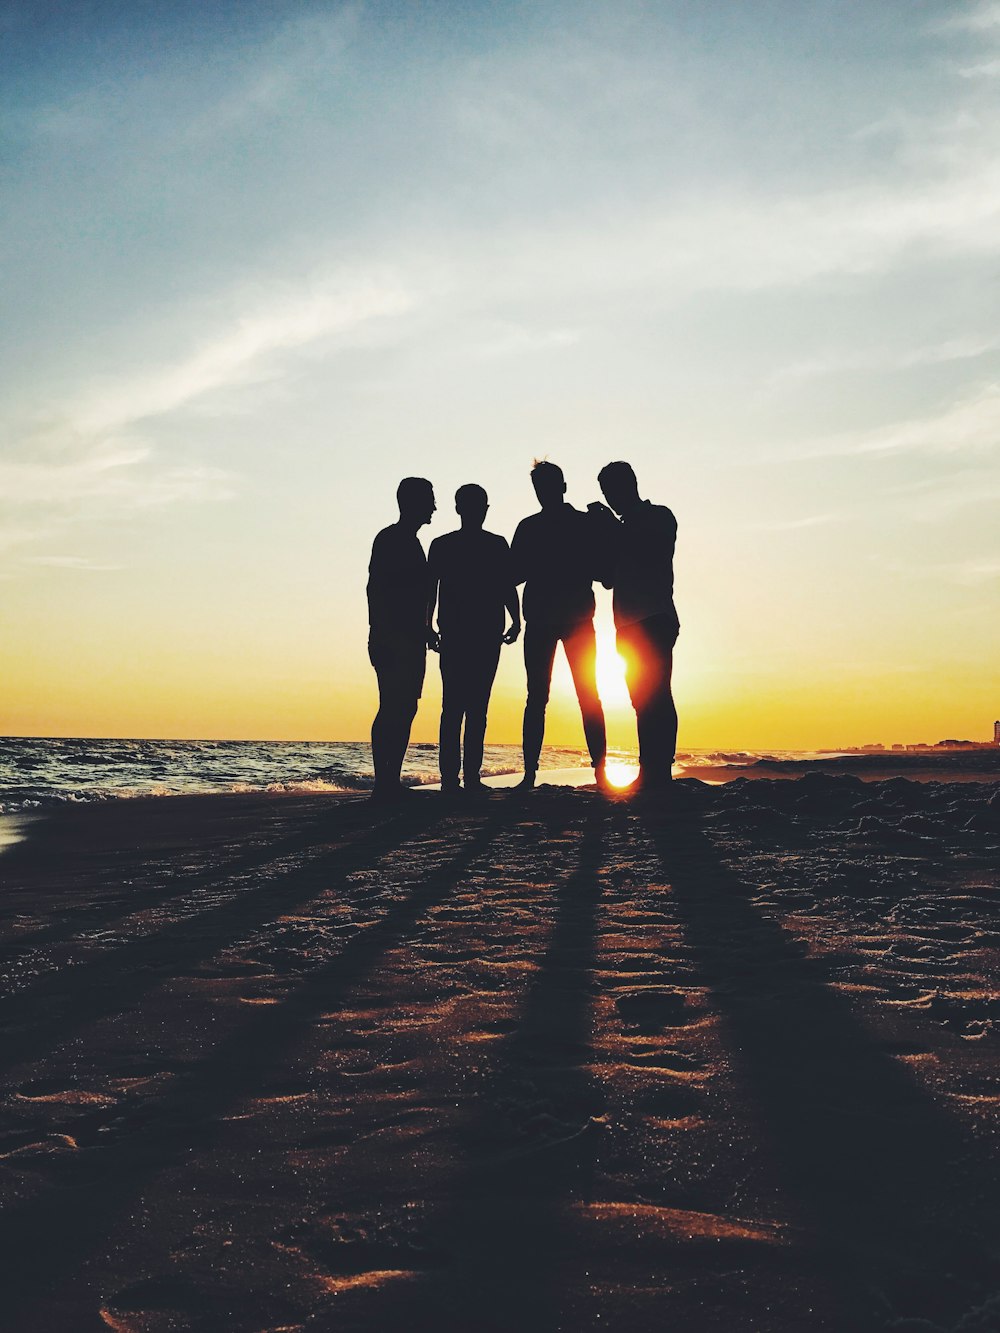 silhouette photography of four person standing on shore